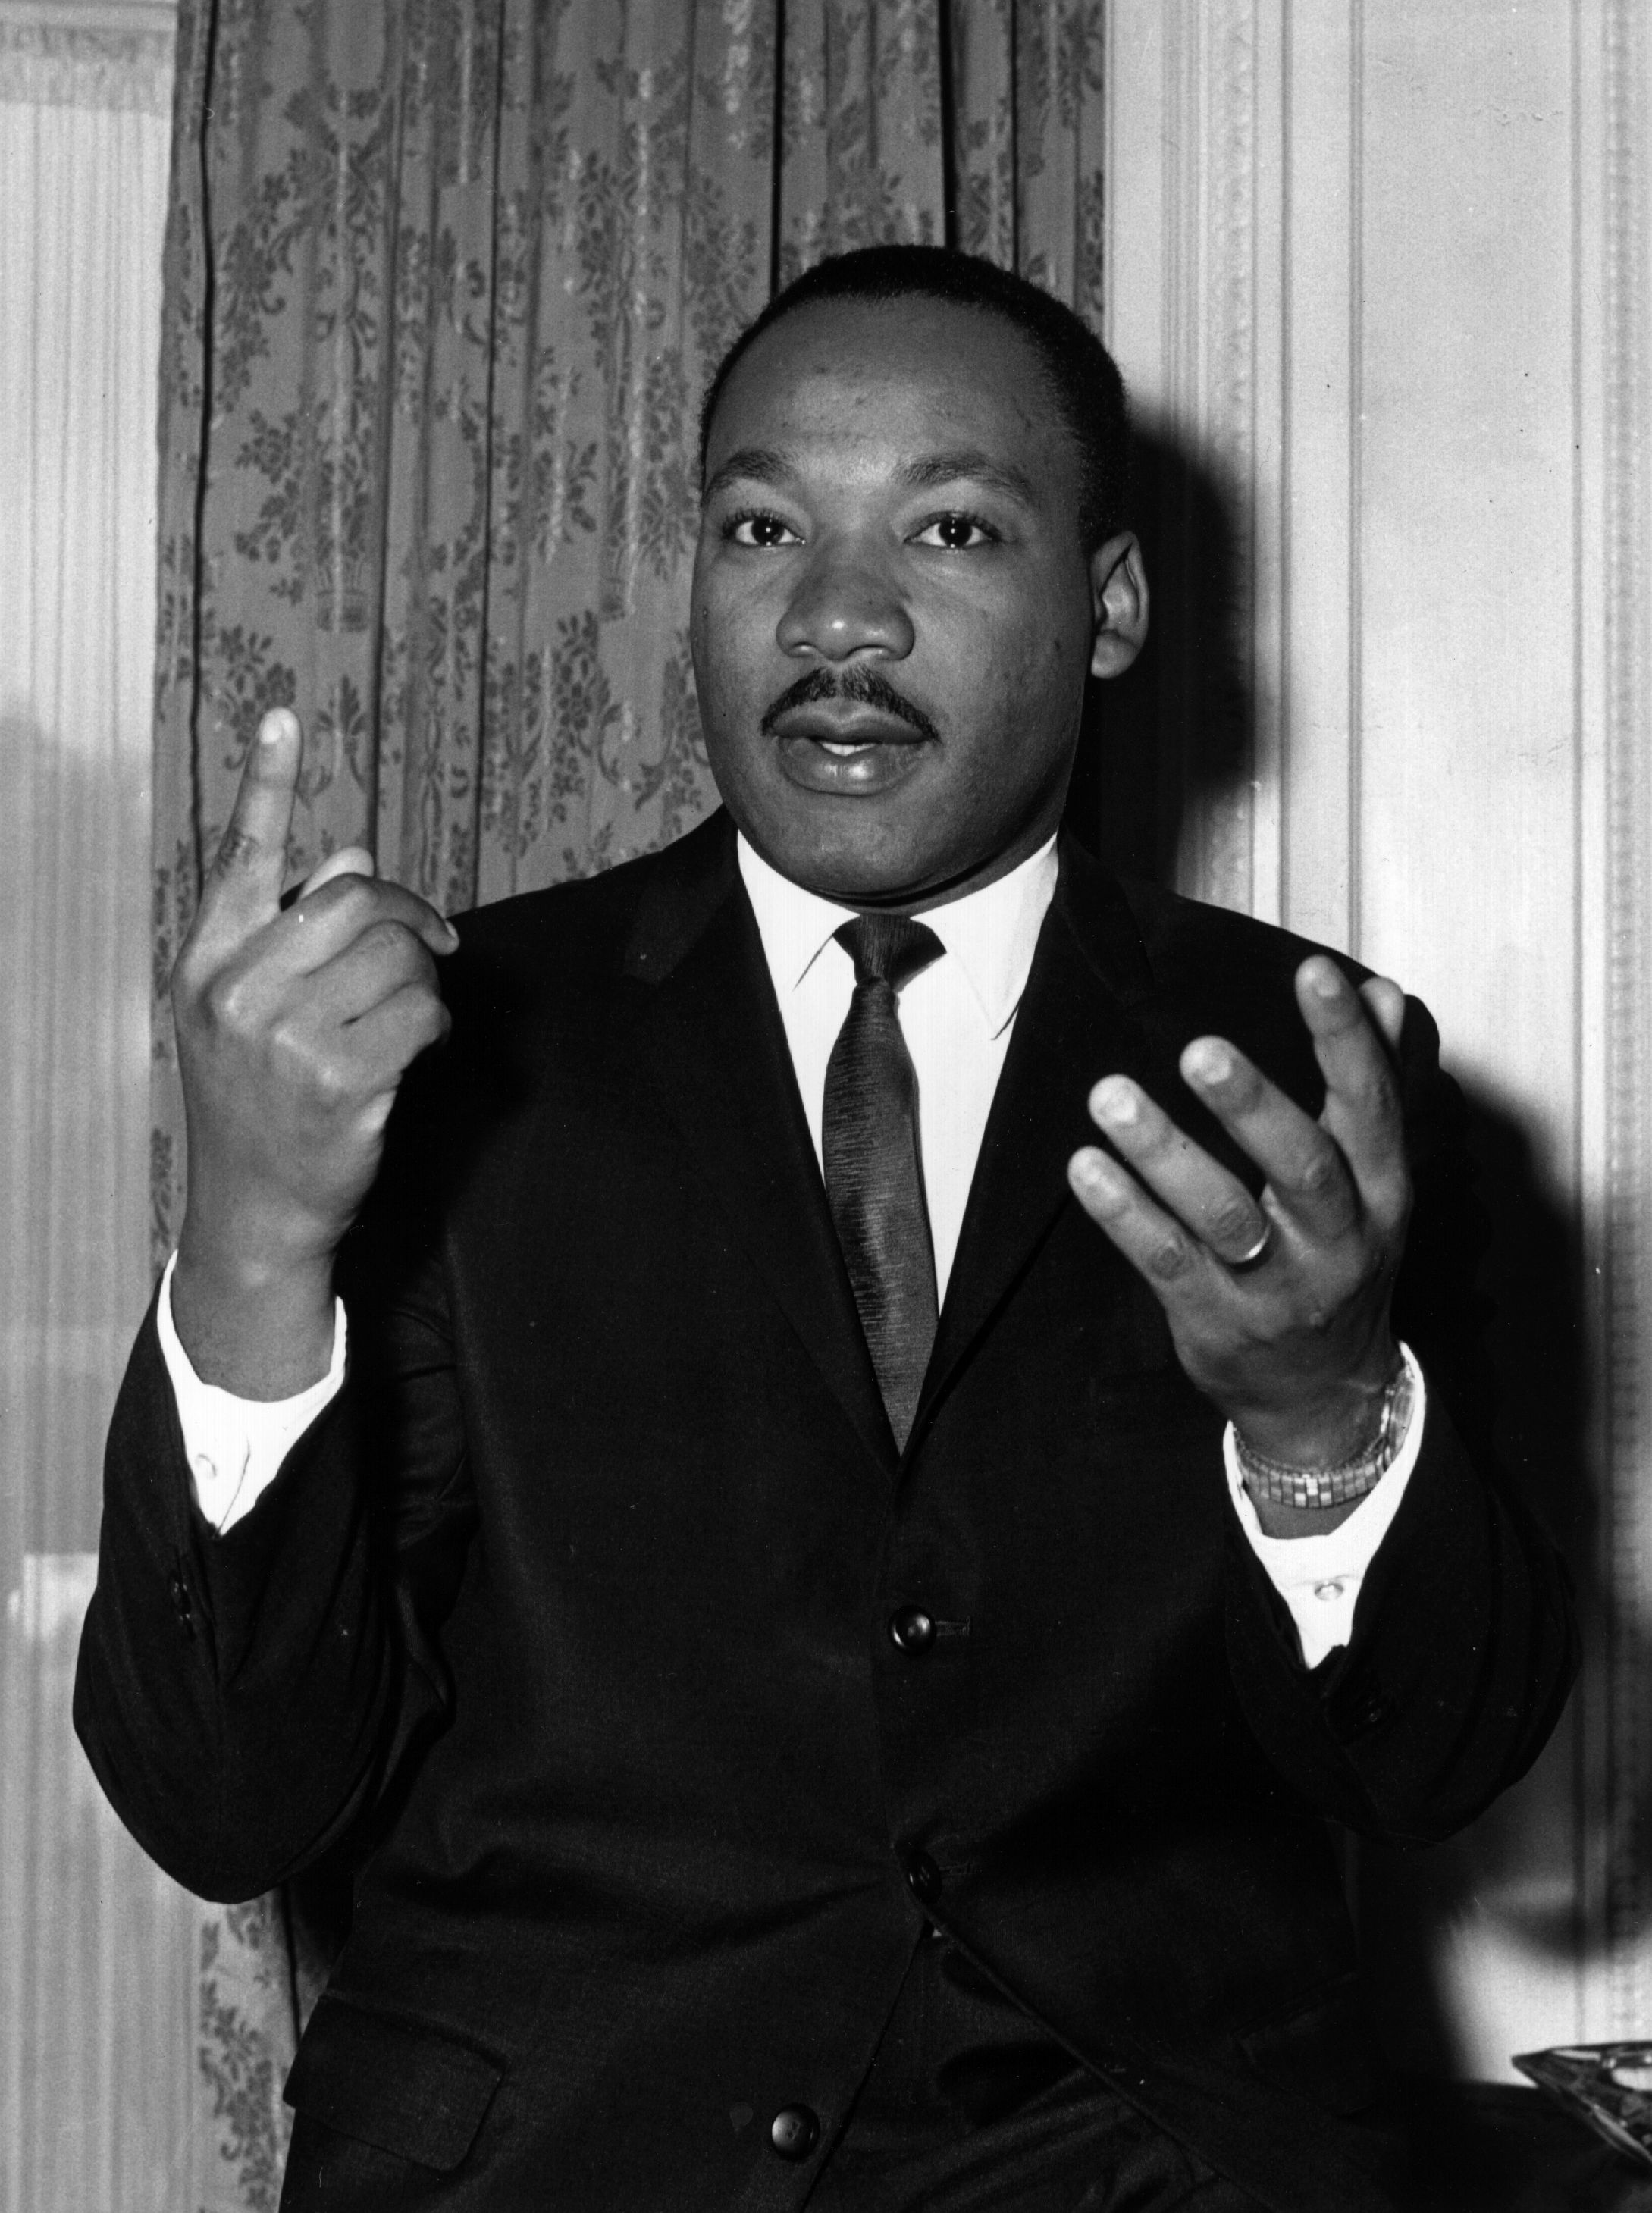 Top 16 Most Powerful Martin Luther King Jr. Quotes